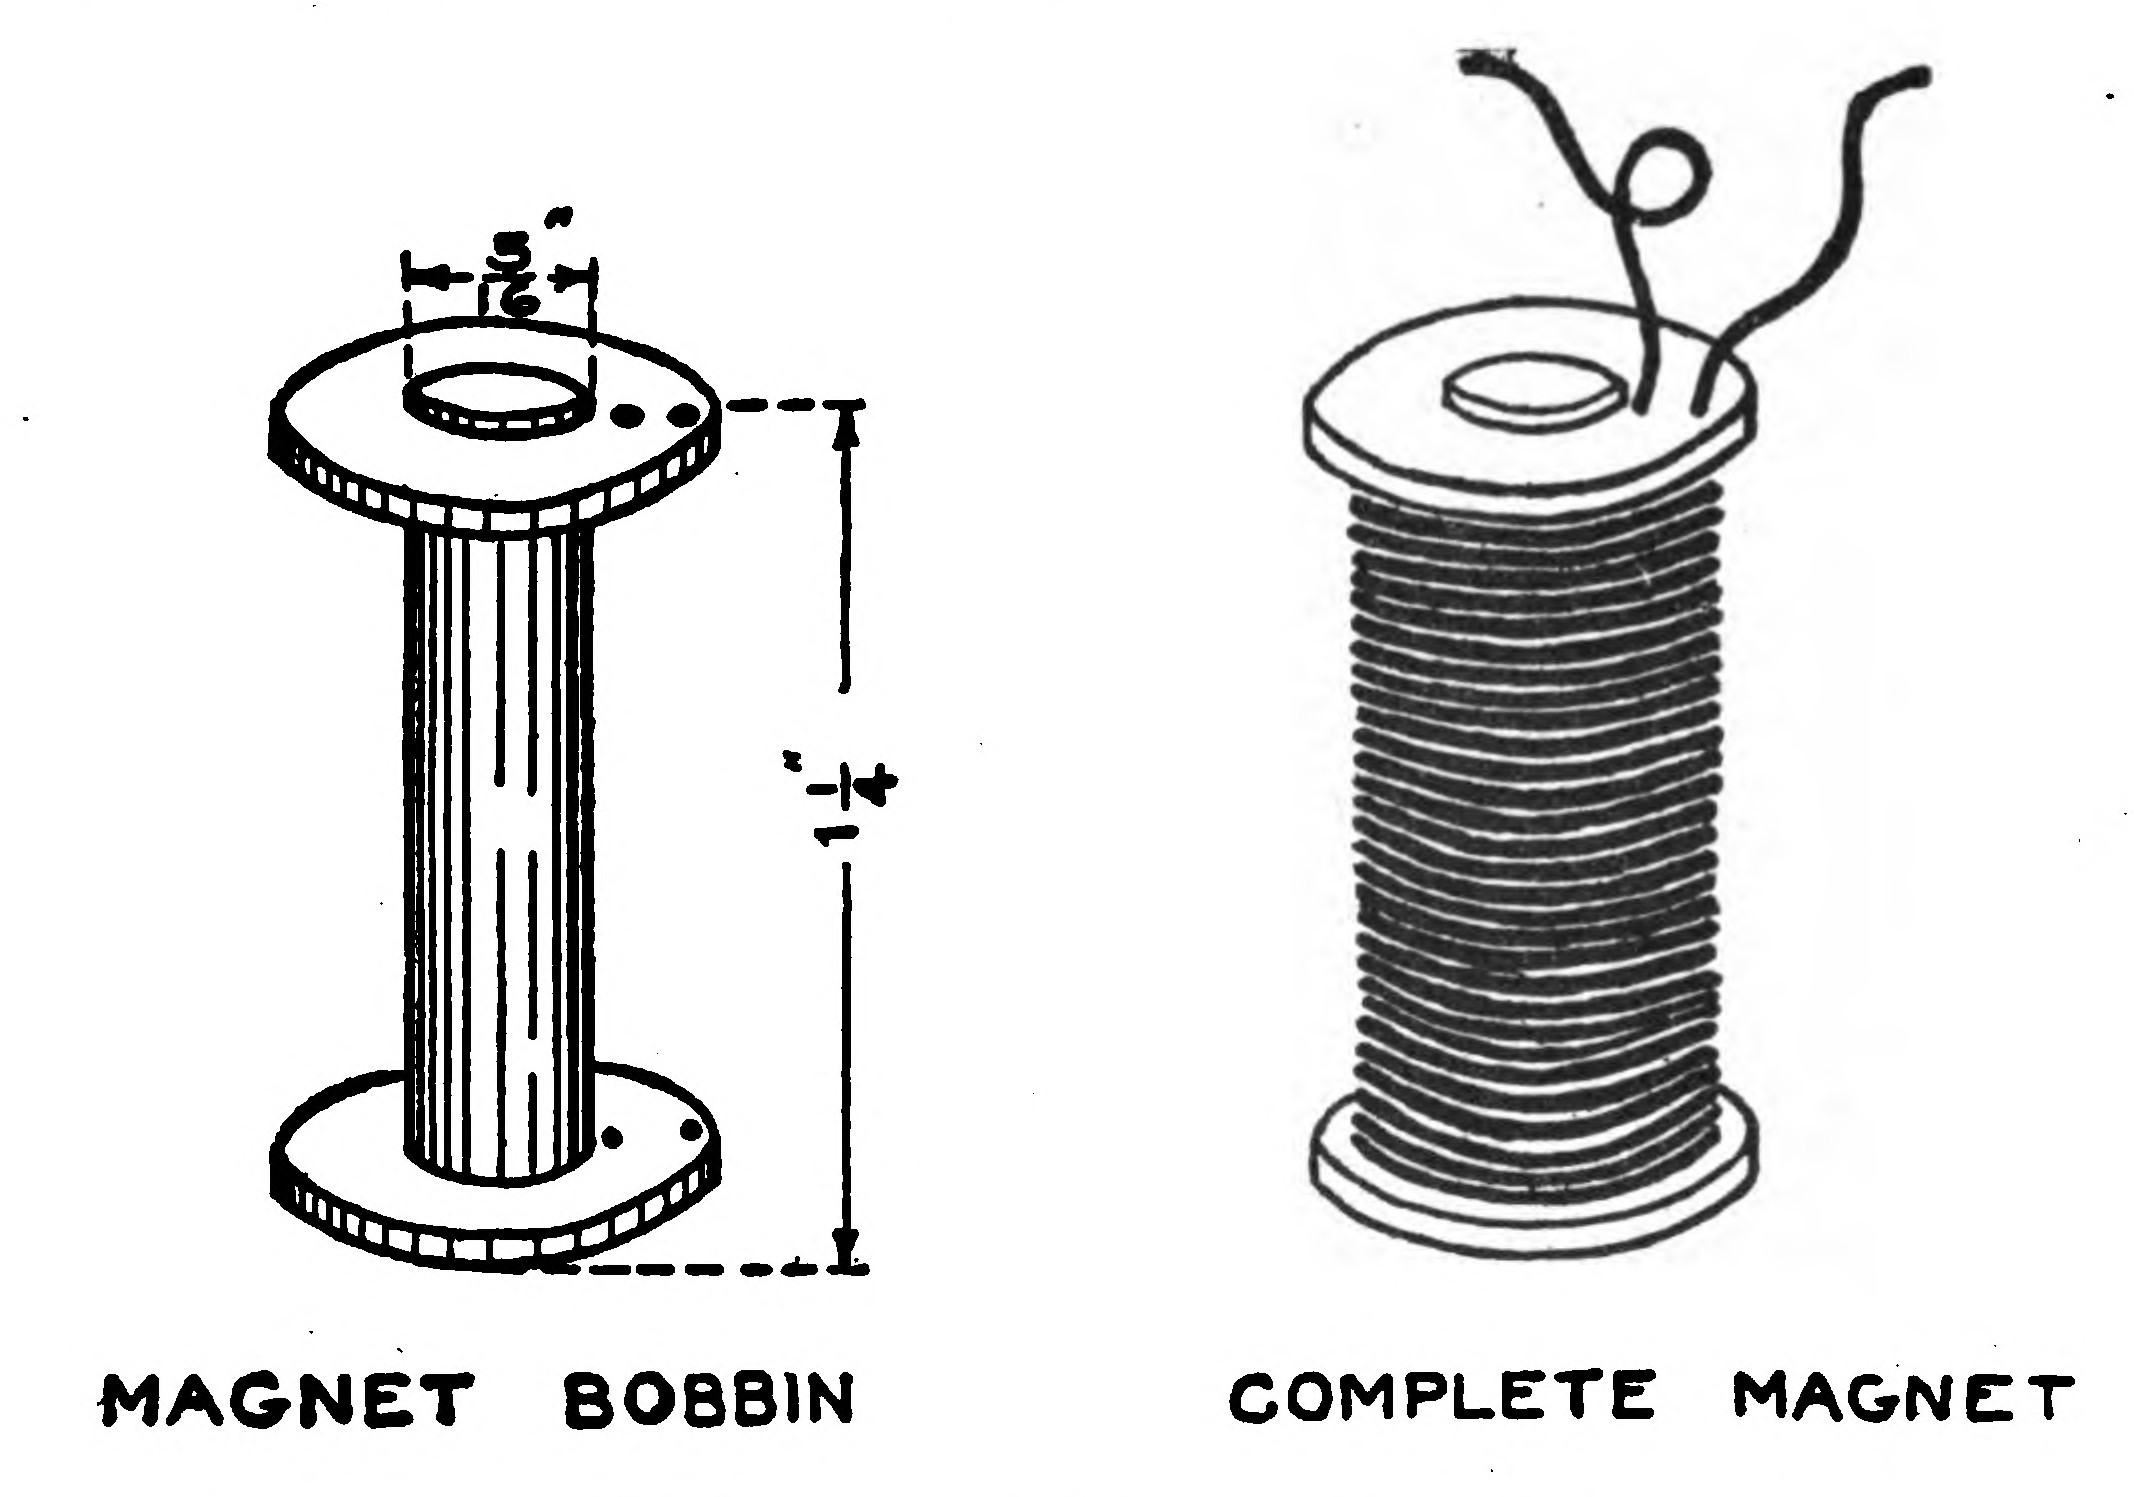 FIG. 85.—The Electro Magnets.